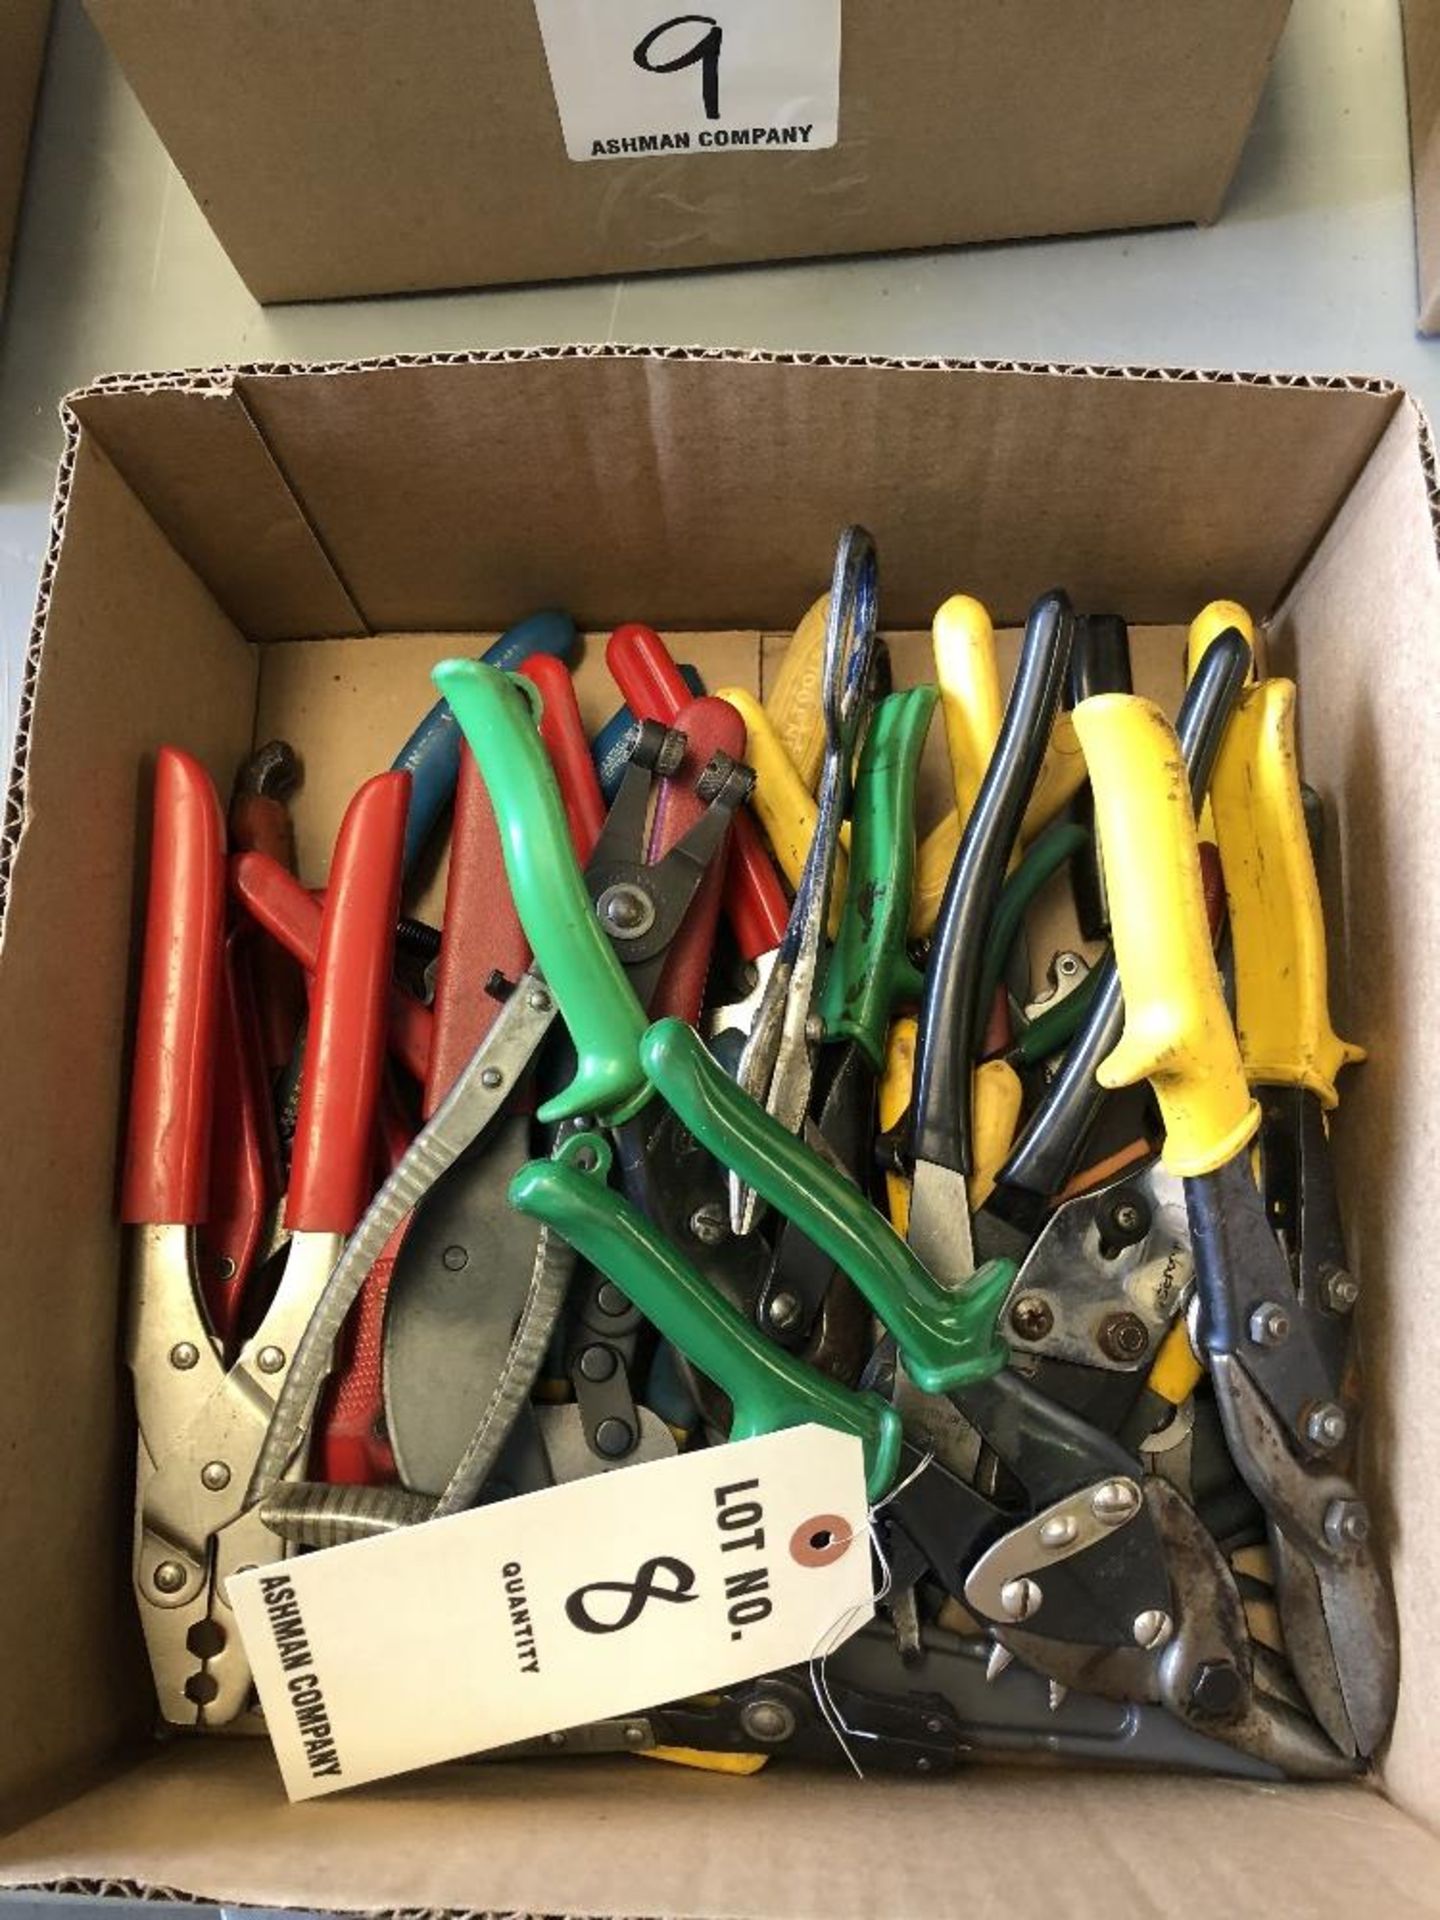 (LOT) MISCELLANEOUS WIRE CUTTERS, SNIPPERS